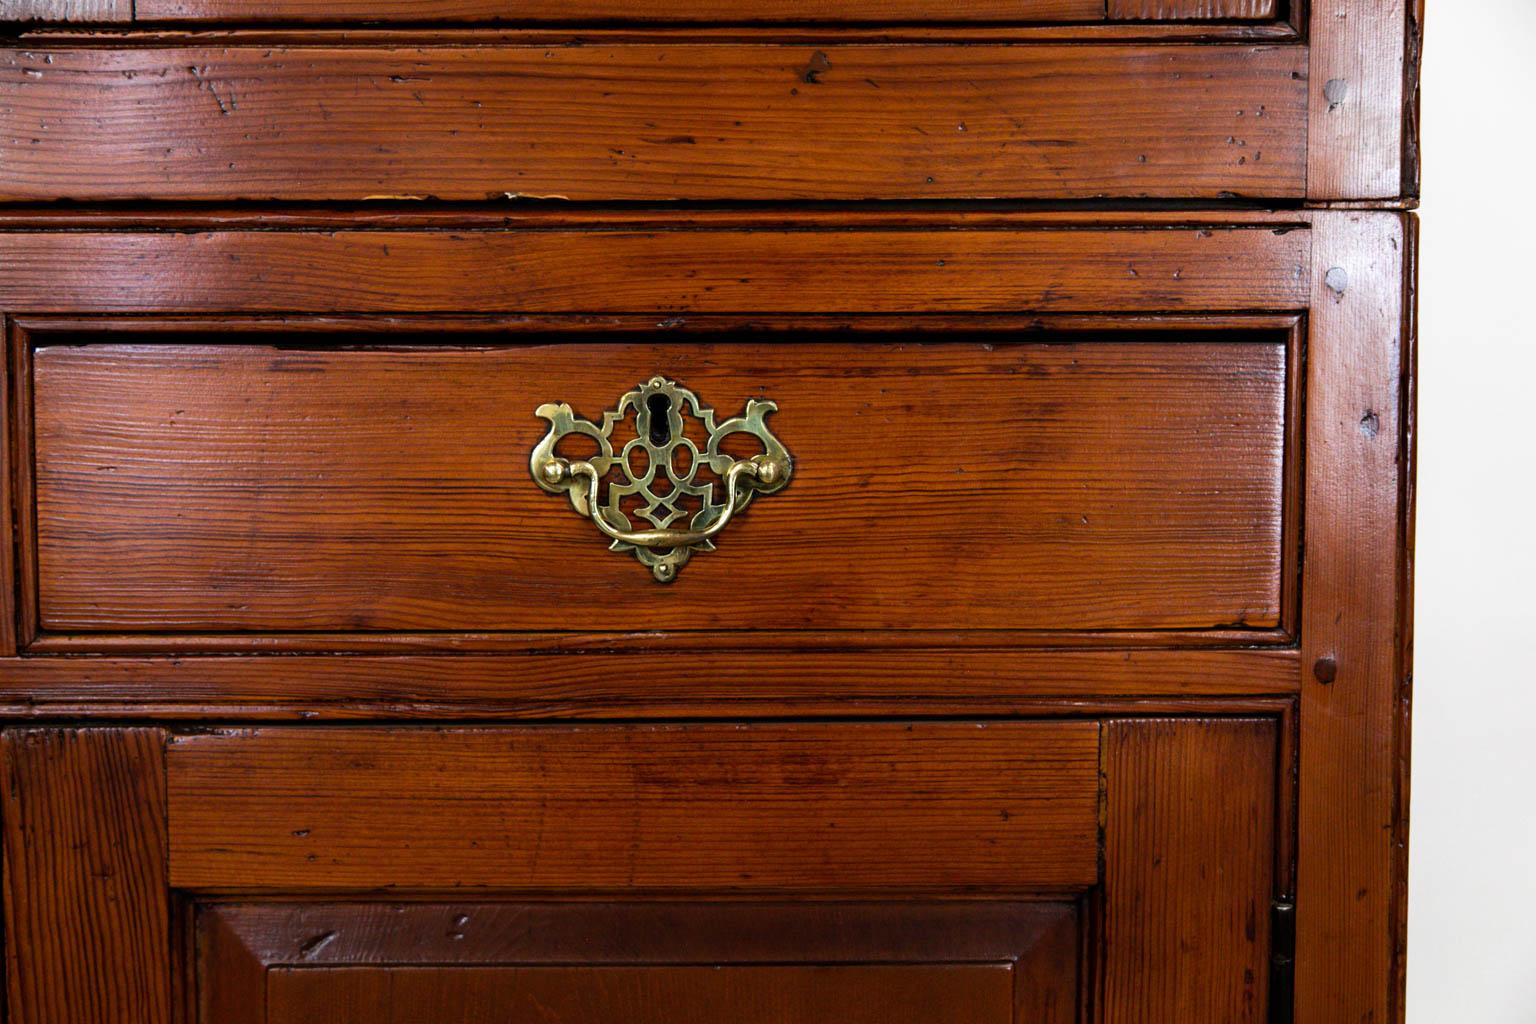 The cornice, feet, and hardware on this beautiful cupboard are later. The upper and lower doors have raised panels. The four doors and drawers are framed with simulated incised beading.